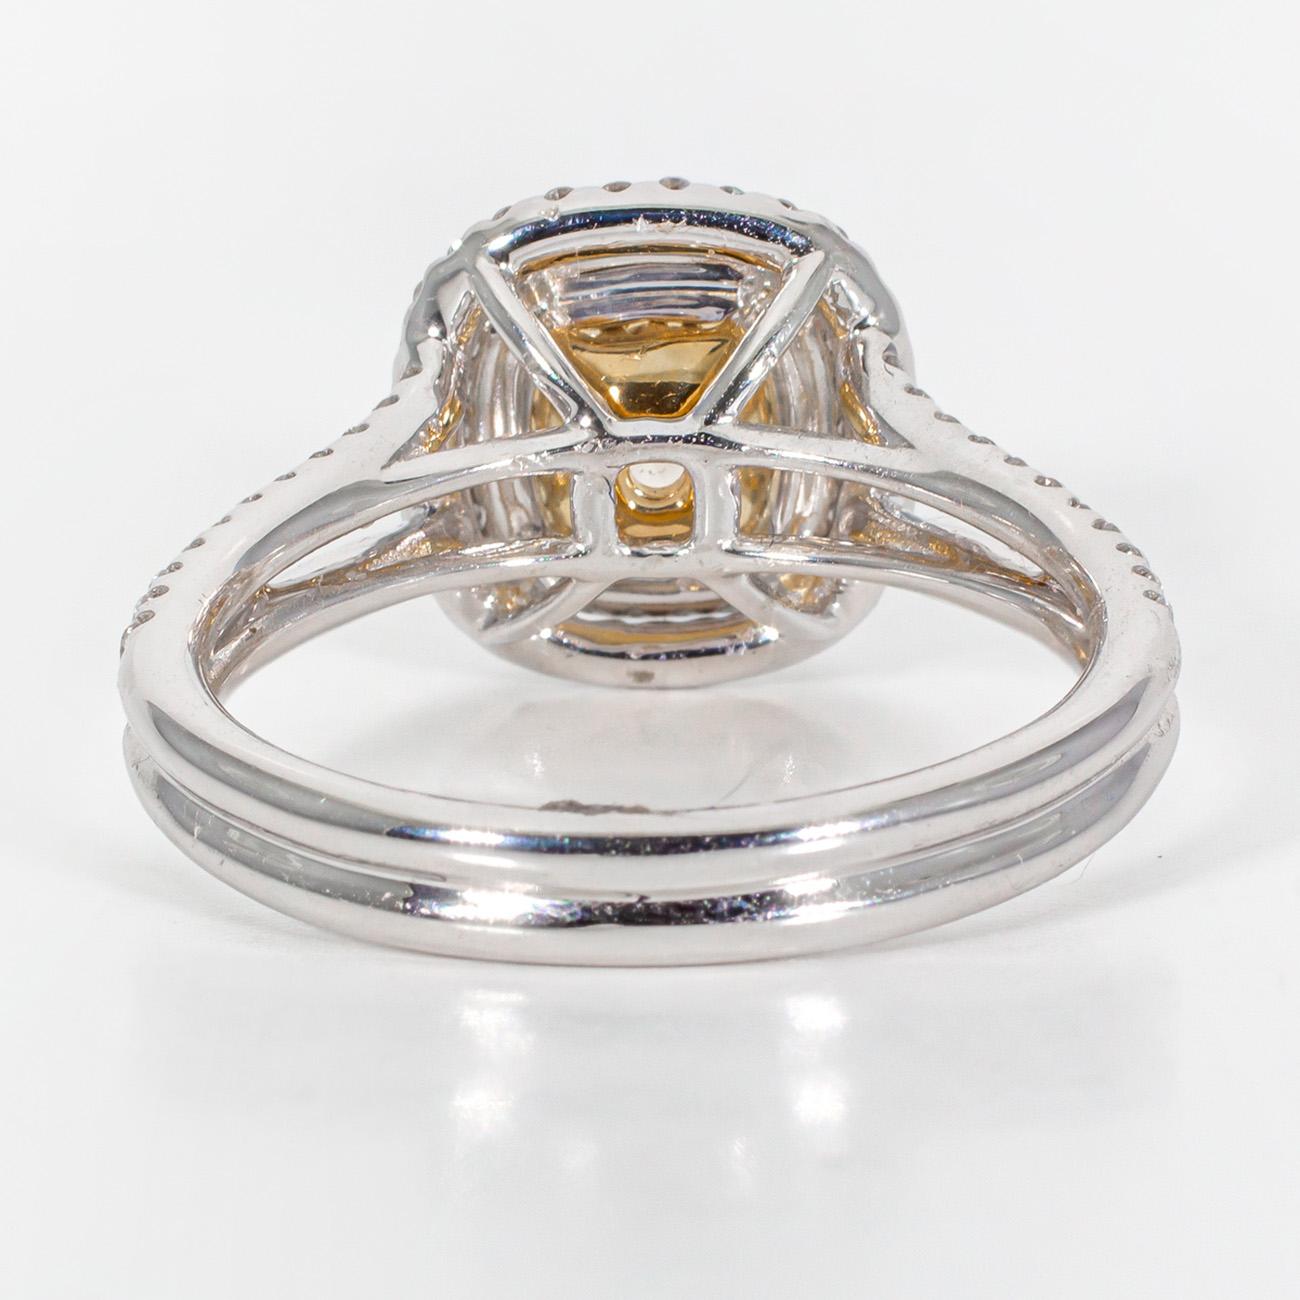 Women's Double Halo Ring in 18K WG with Fancy Yellow Cushion Diamond Center. D1.37ct. For Sale